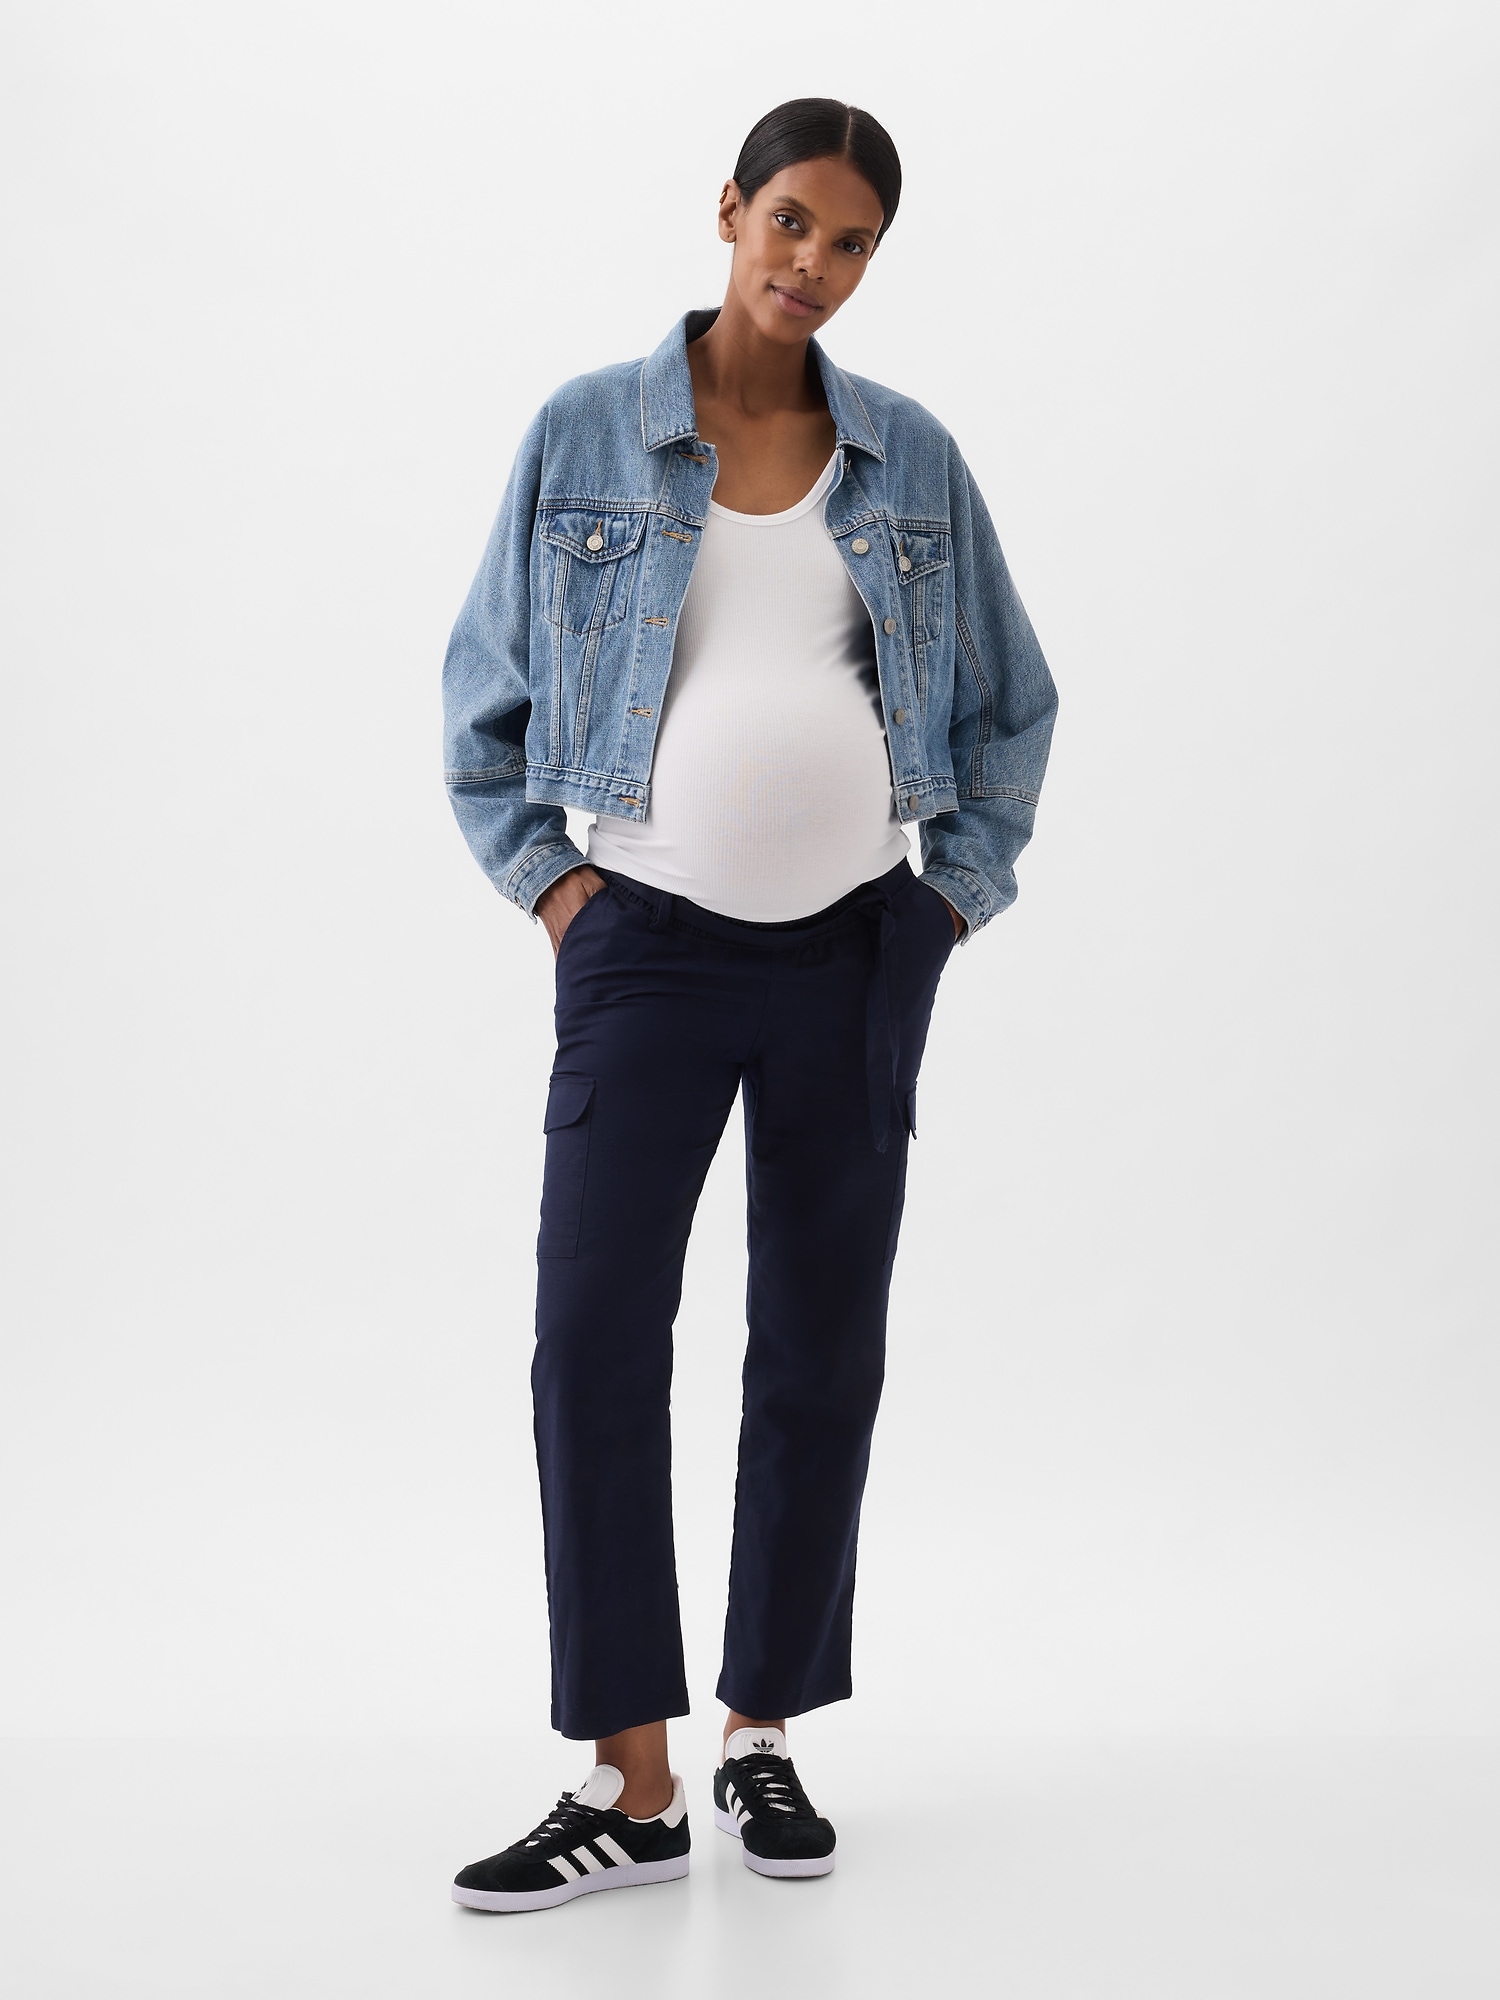 Best Maternity Clothes